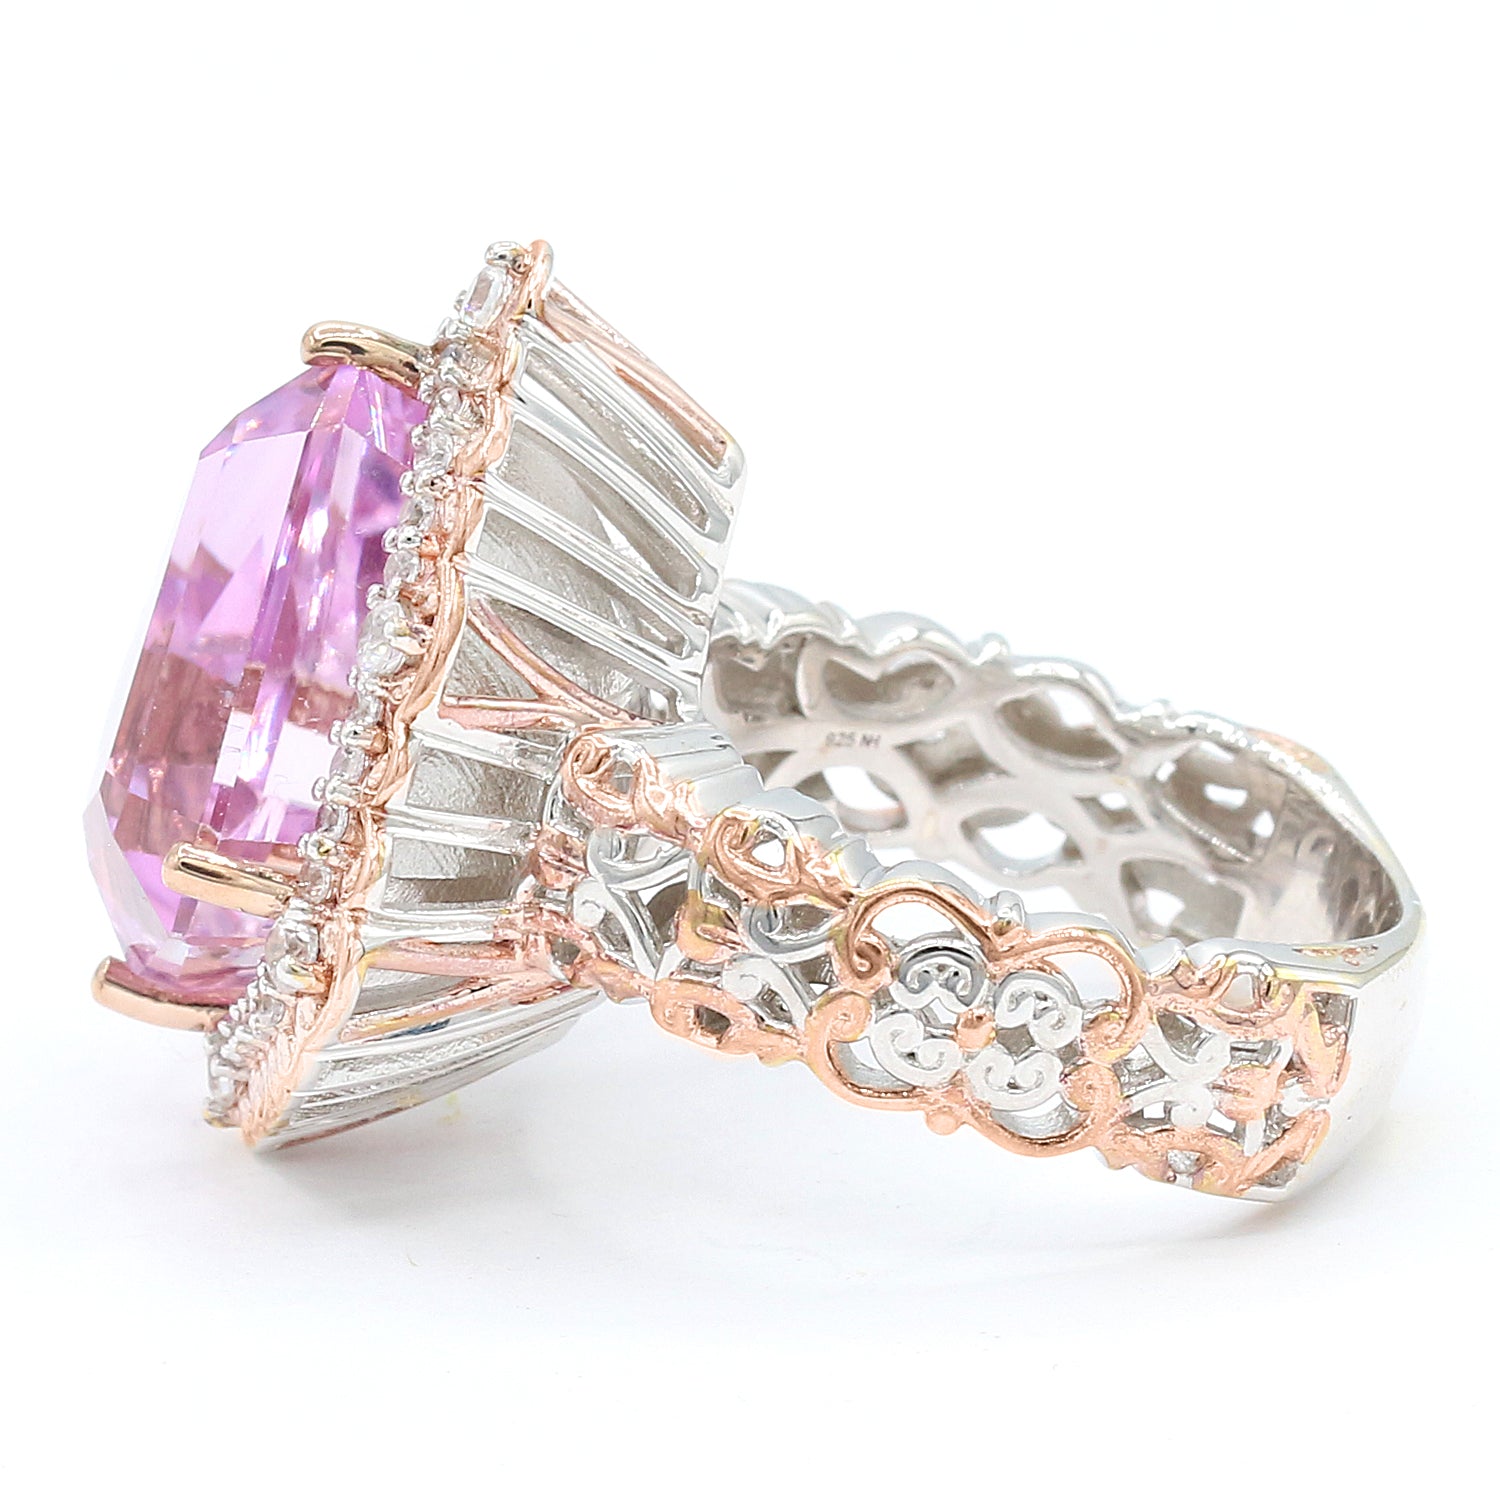 Limited Edition Gems en Vogue Luxe One-of-a-Kind 14.94ctw Shield Cut Kunzite & White Zircon Halo Ring